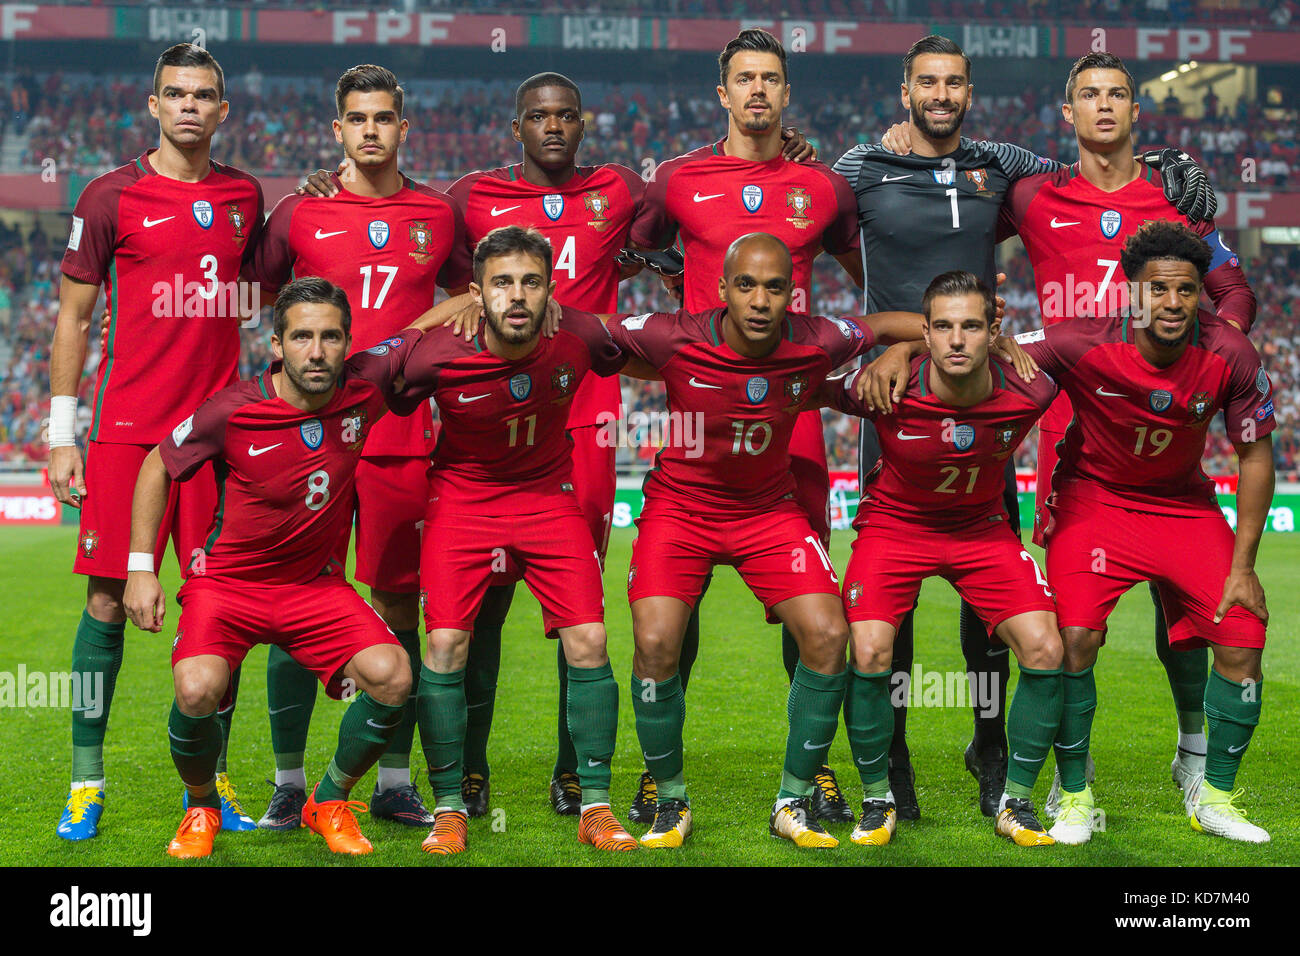 Lisbon, Portugal. 10th Oct, 2017. Portugal's starting team for the FIFA 2018 World Cup Qualifier between Portugal and Switzerland Credit: Alexandre de Sousa/Alamy Live News Stock Photo